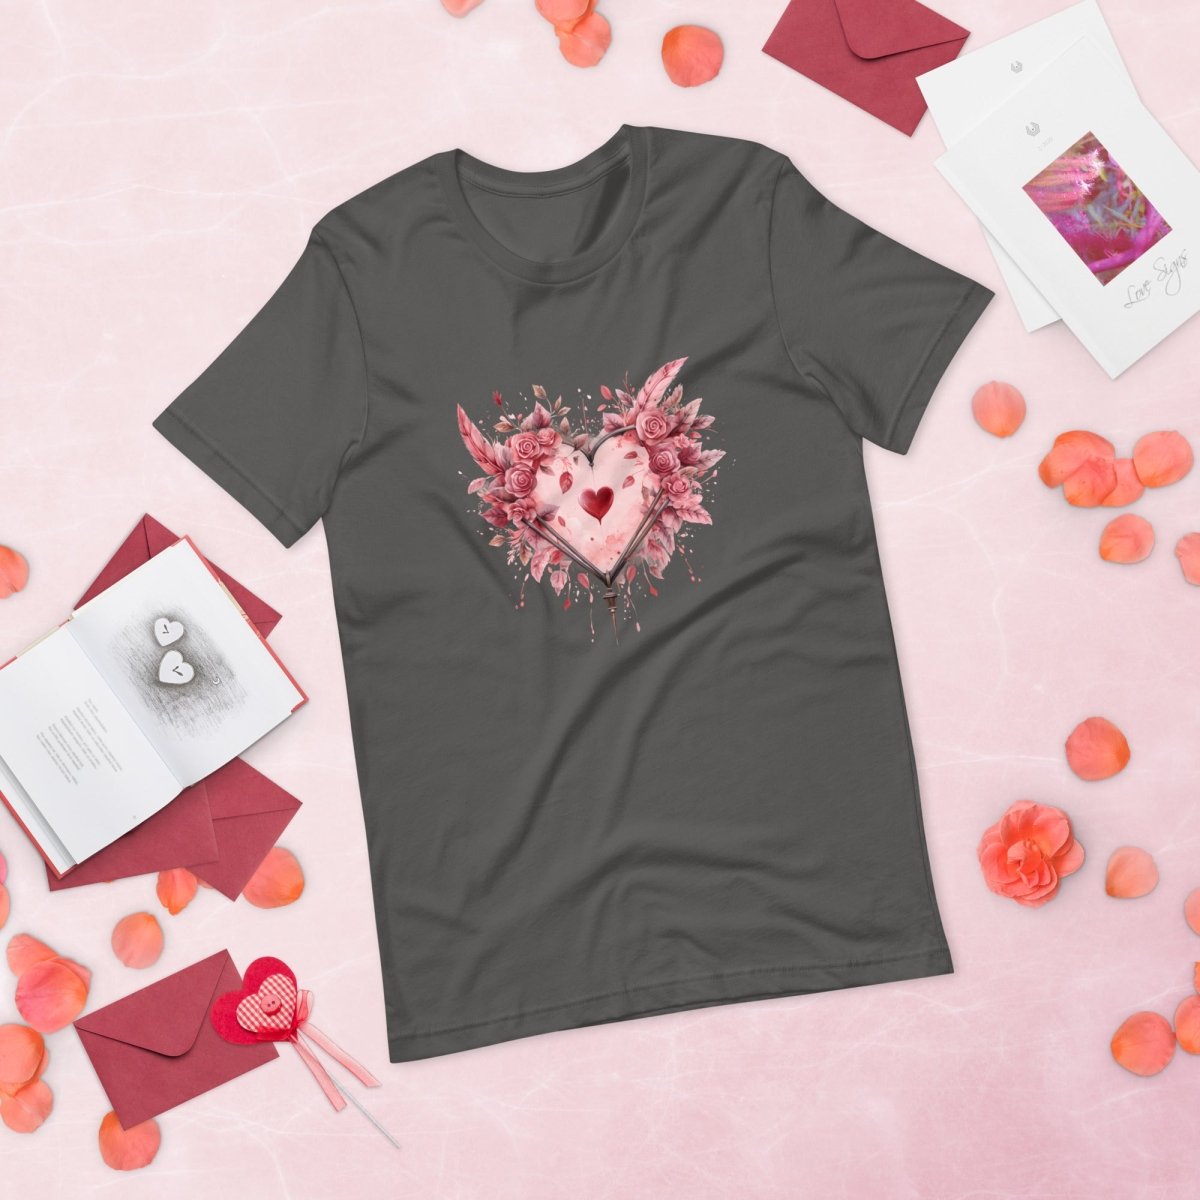 Heart T-Shirt High Quality Floral Heart Valentines Day Shirt Love Gift for Her Love Tee Anniversary Shirt Cute Heart Tee Love Shirt - Everything Pixel